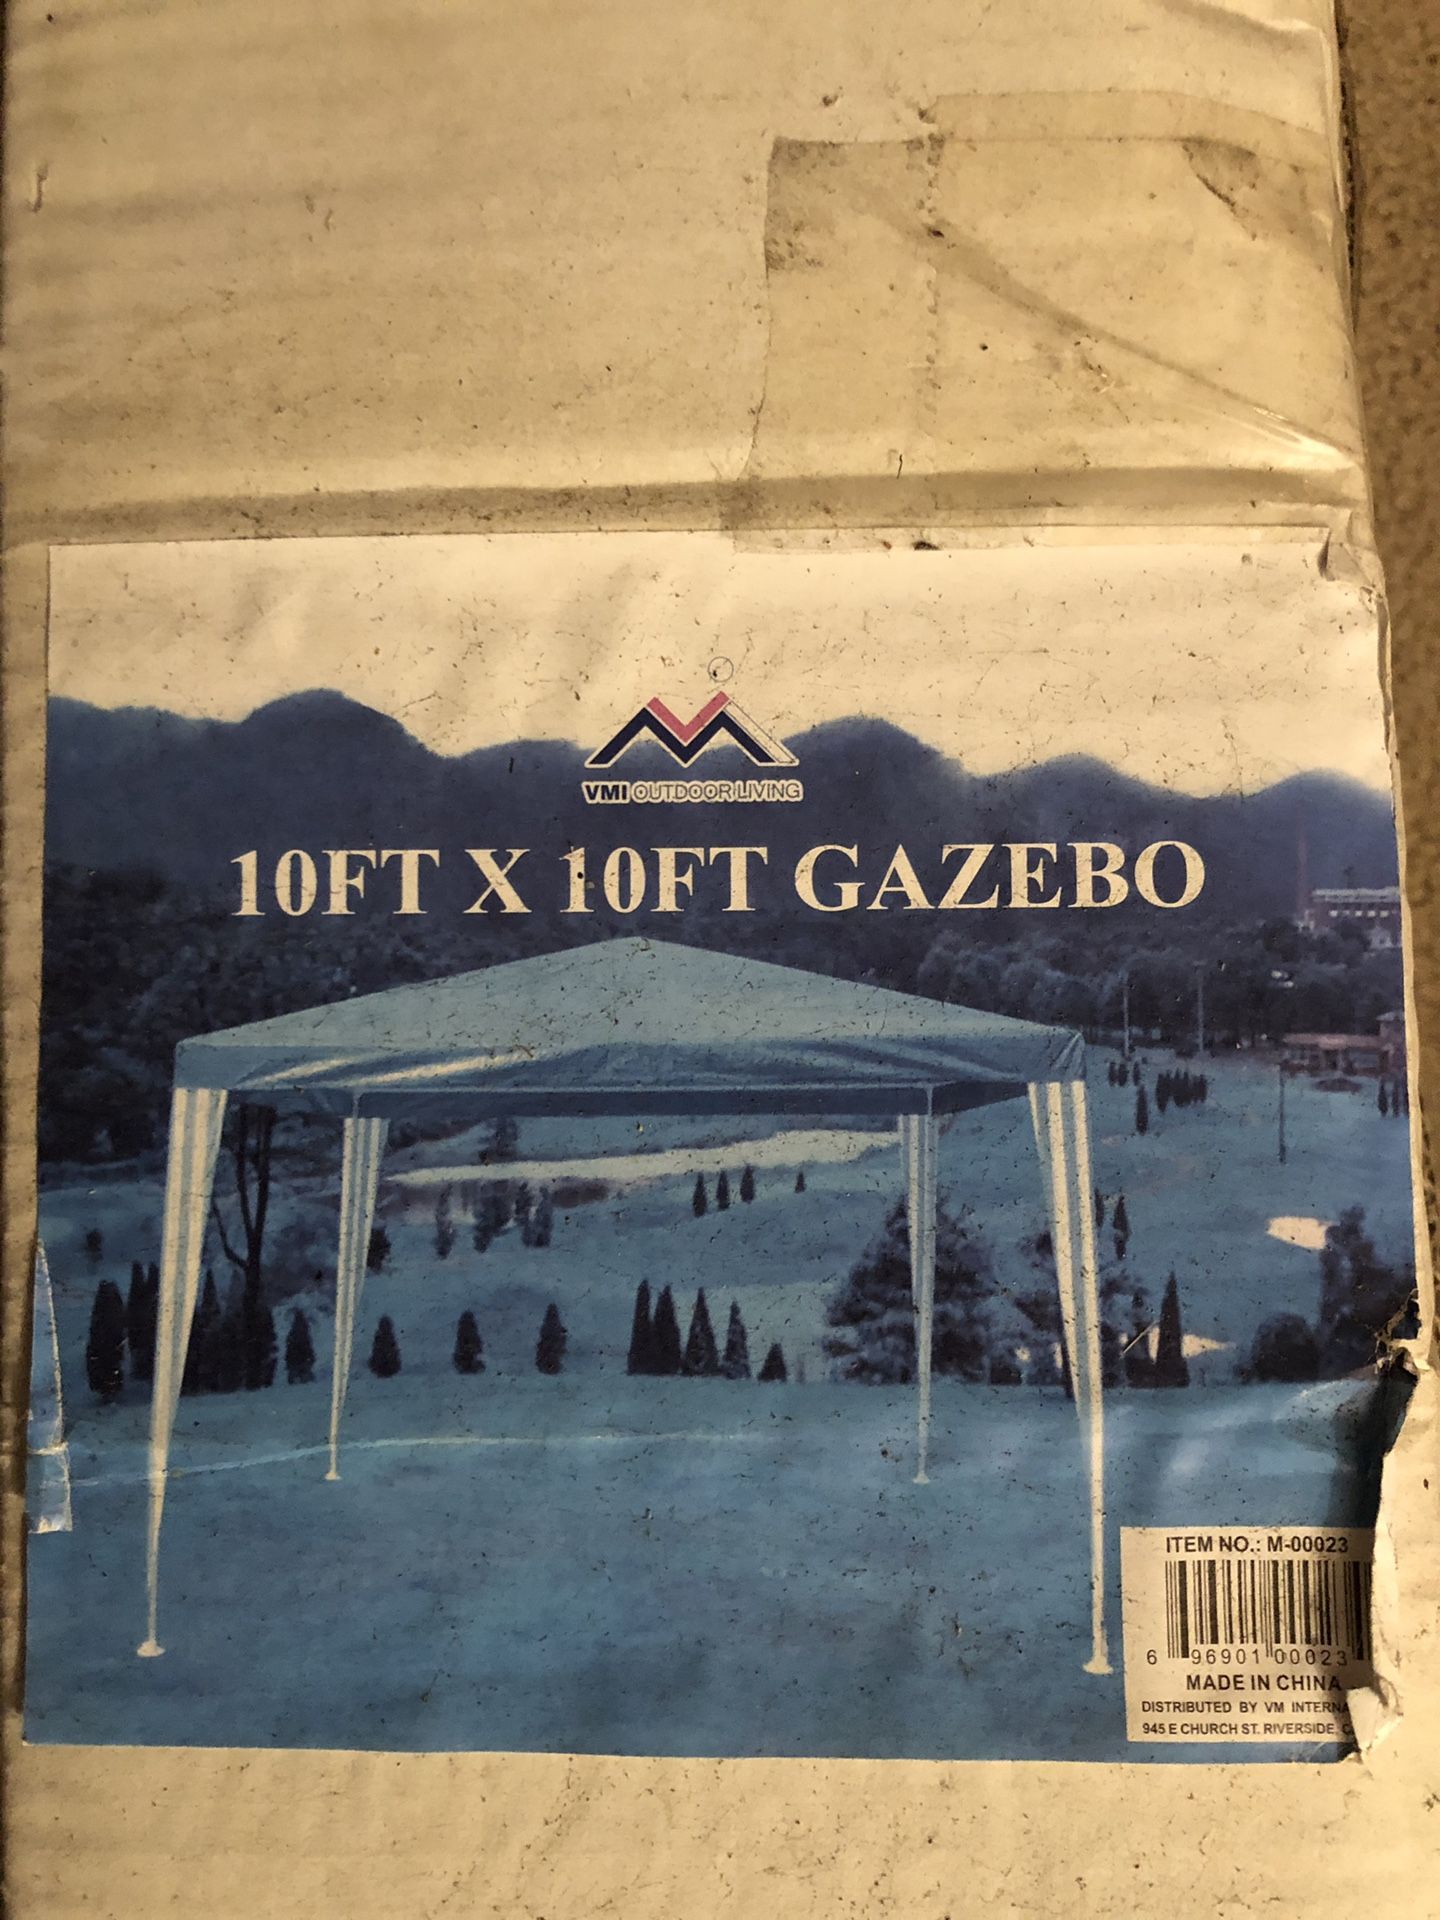 10ft x 10ft tent. Used once.